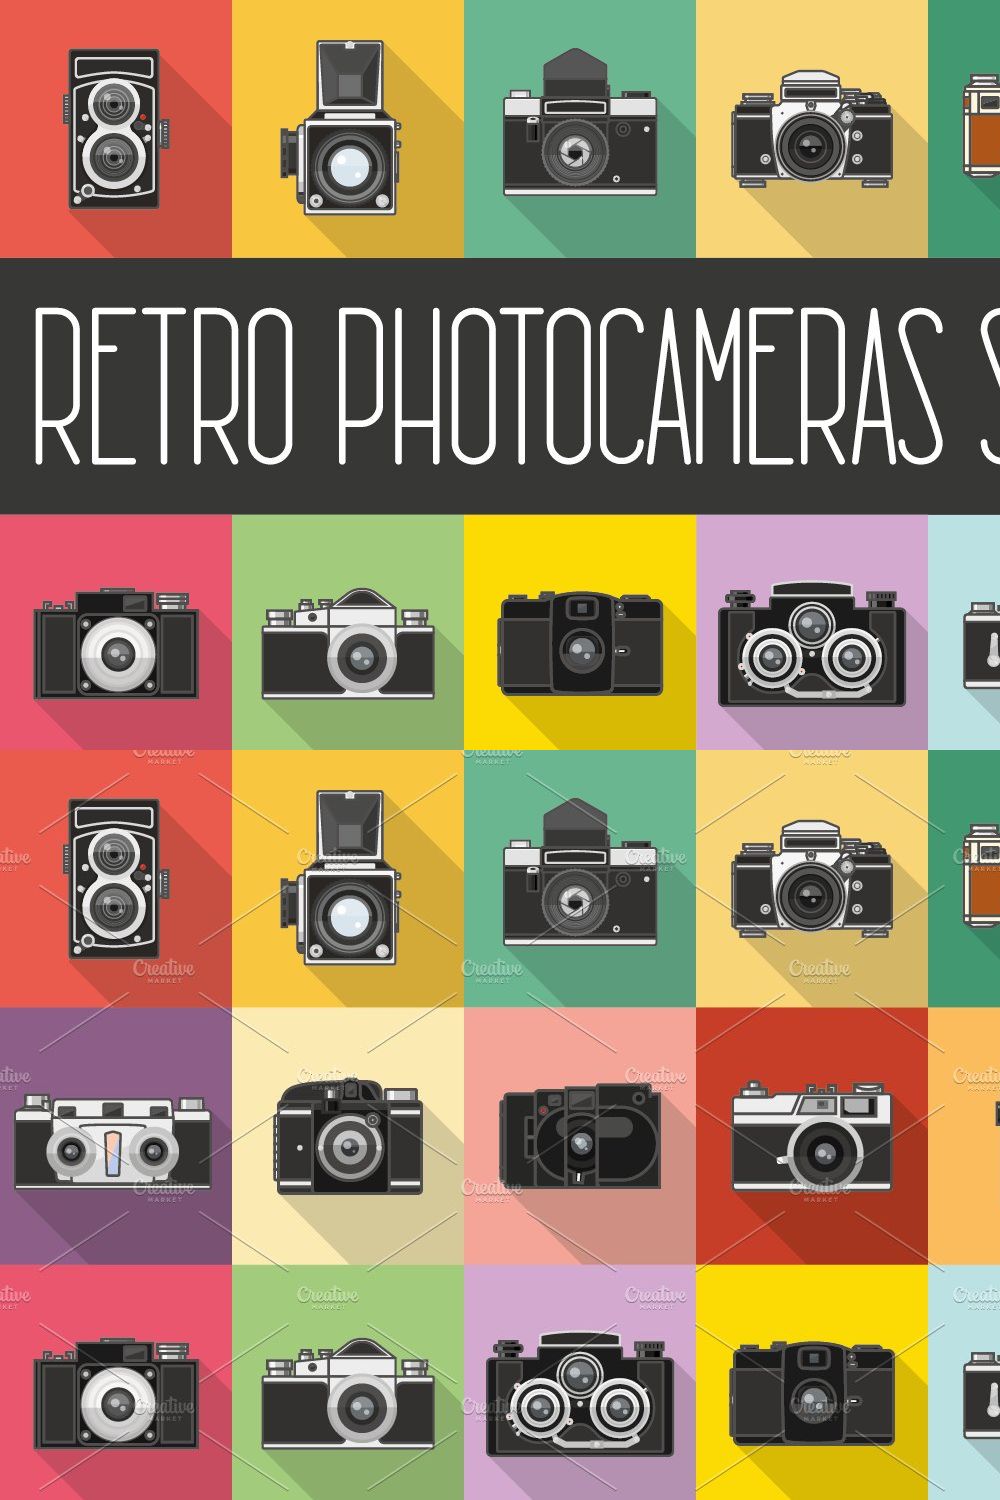 Set of retro photocameras and stuff pinterest preview image.